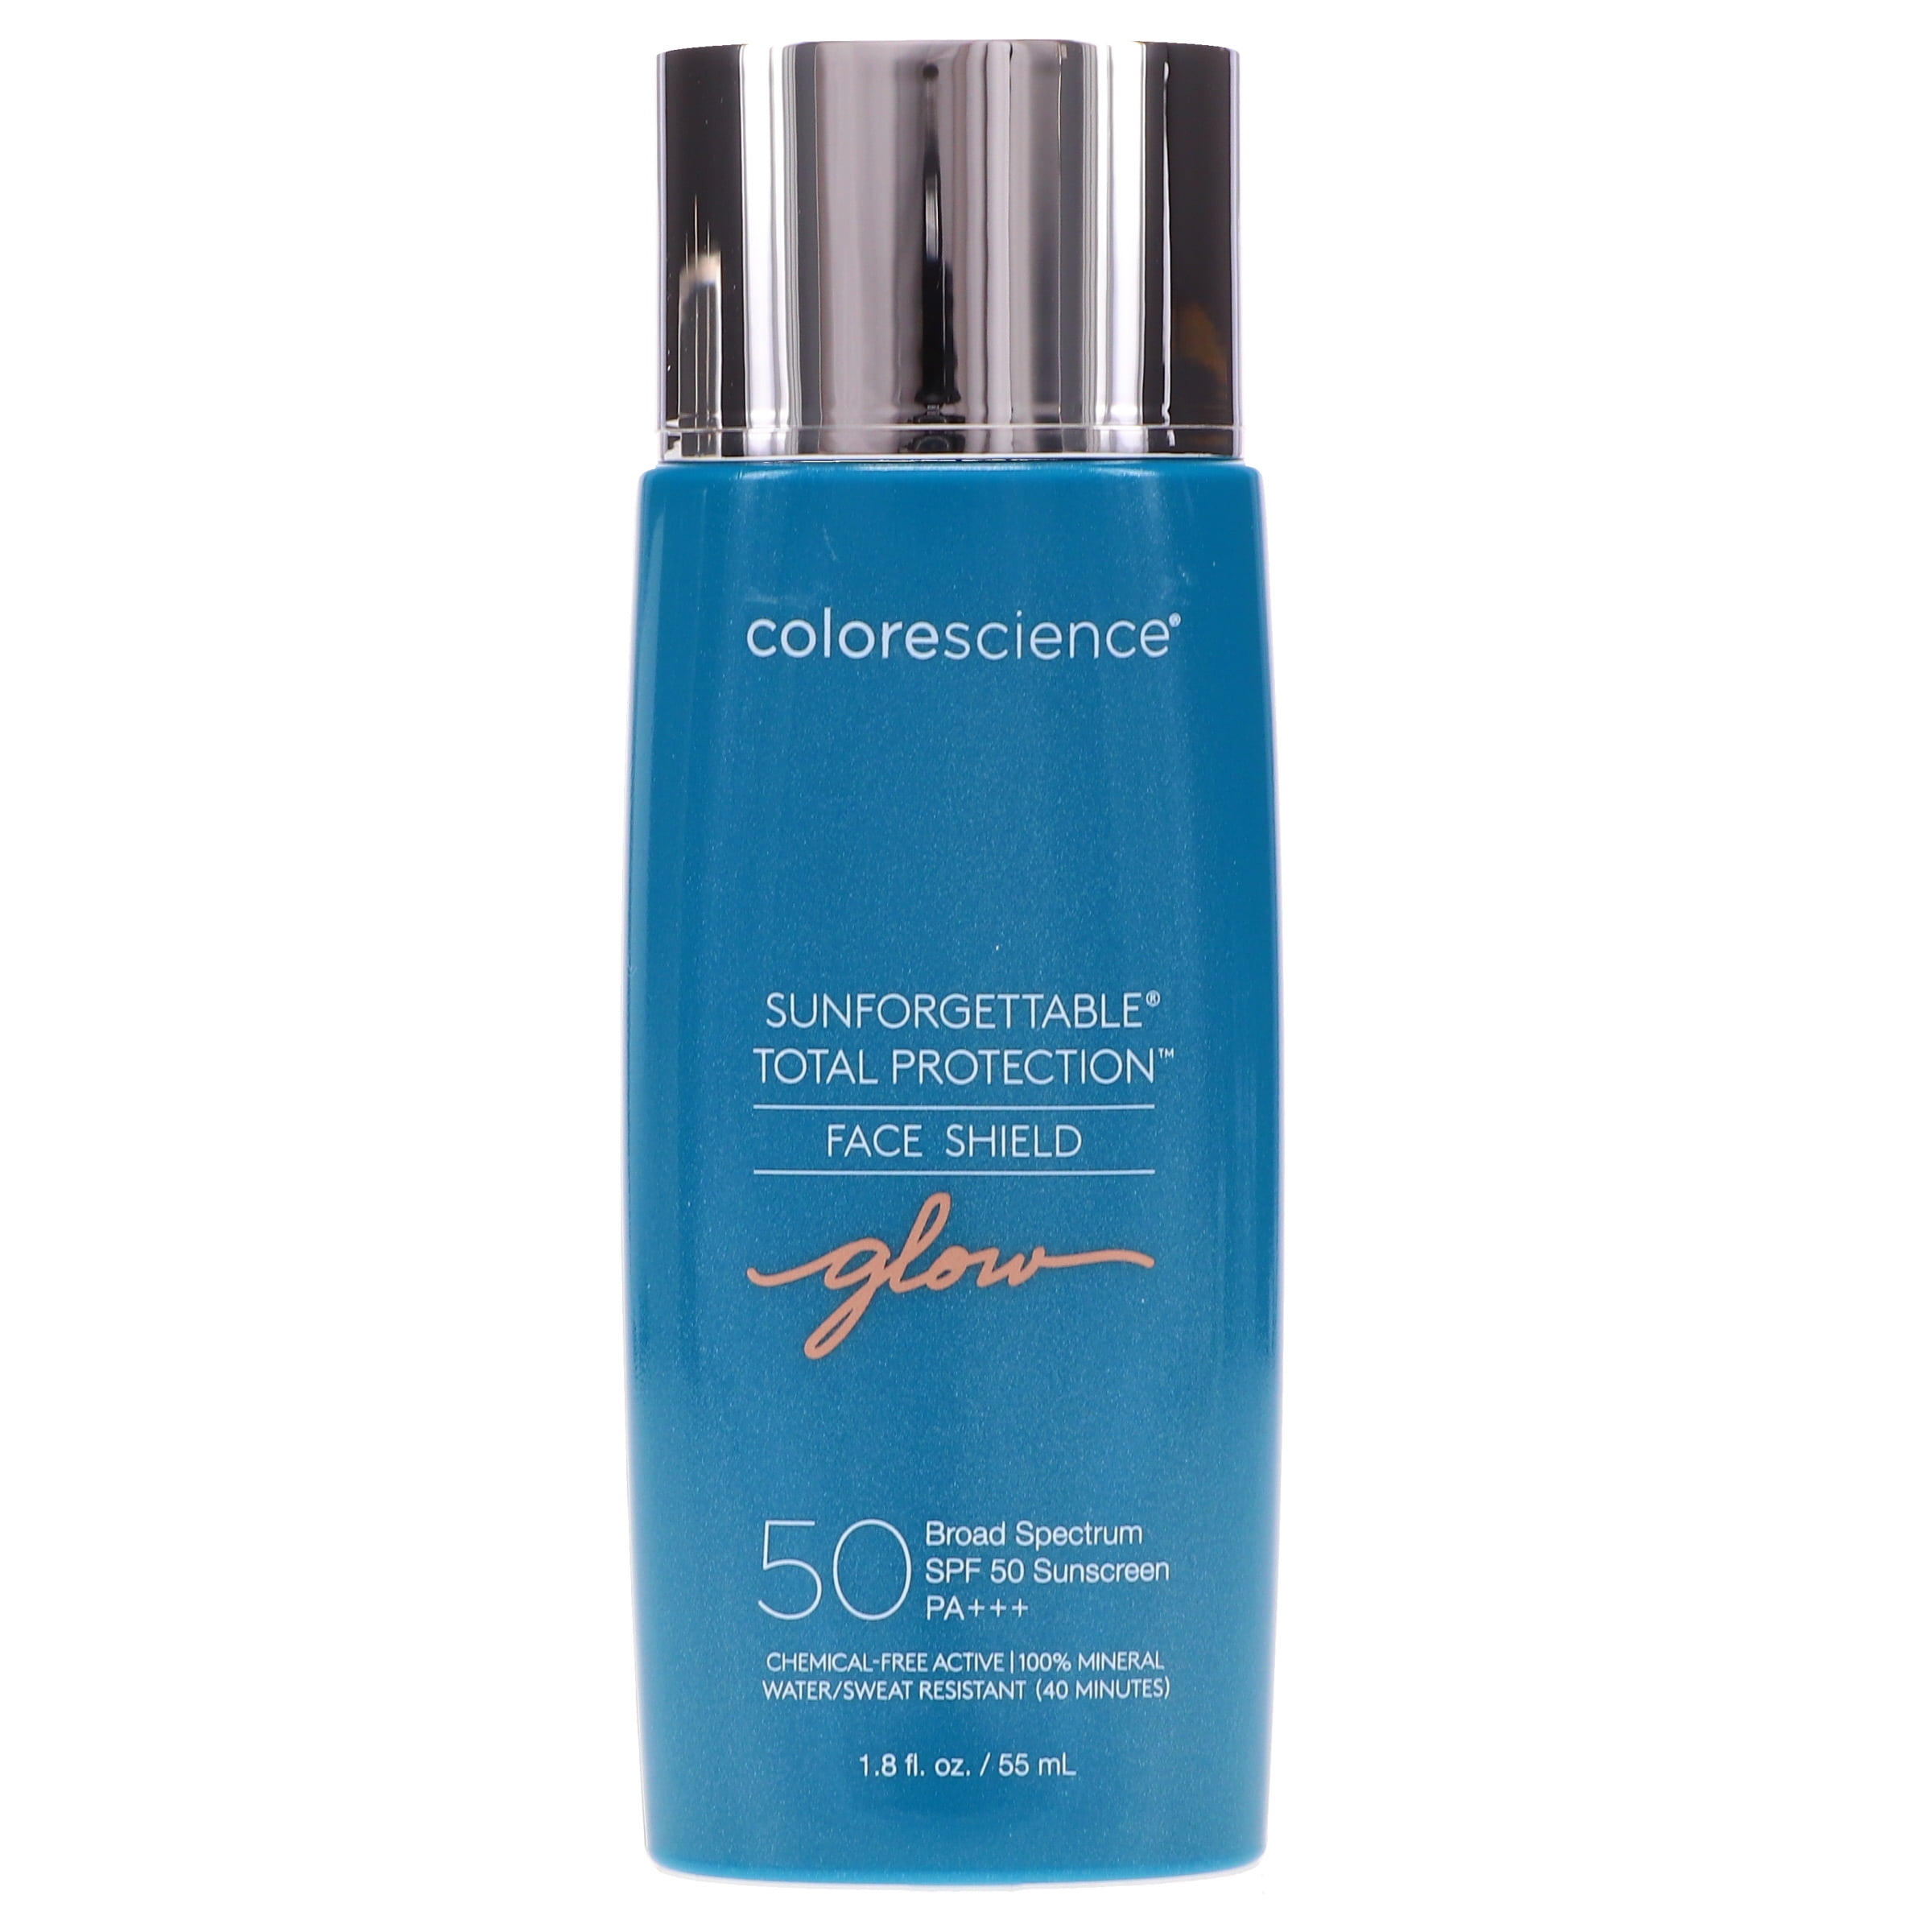 Colorescience Total Protection Face Shield SPF 50 Glow 1.8 oz - image 1 of 8